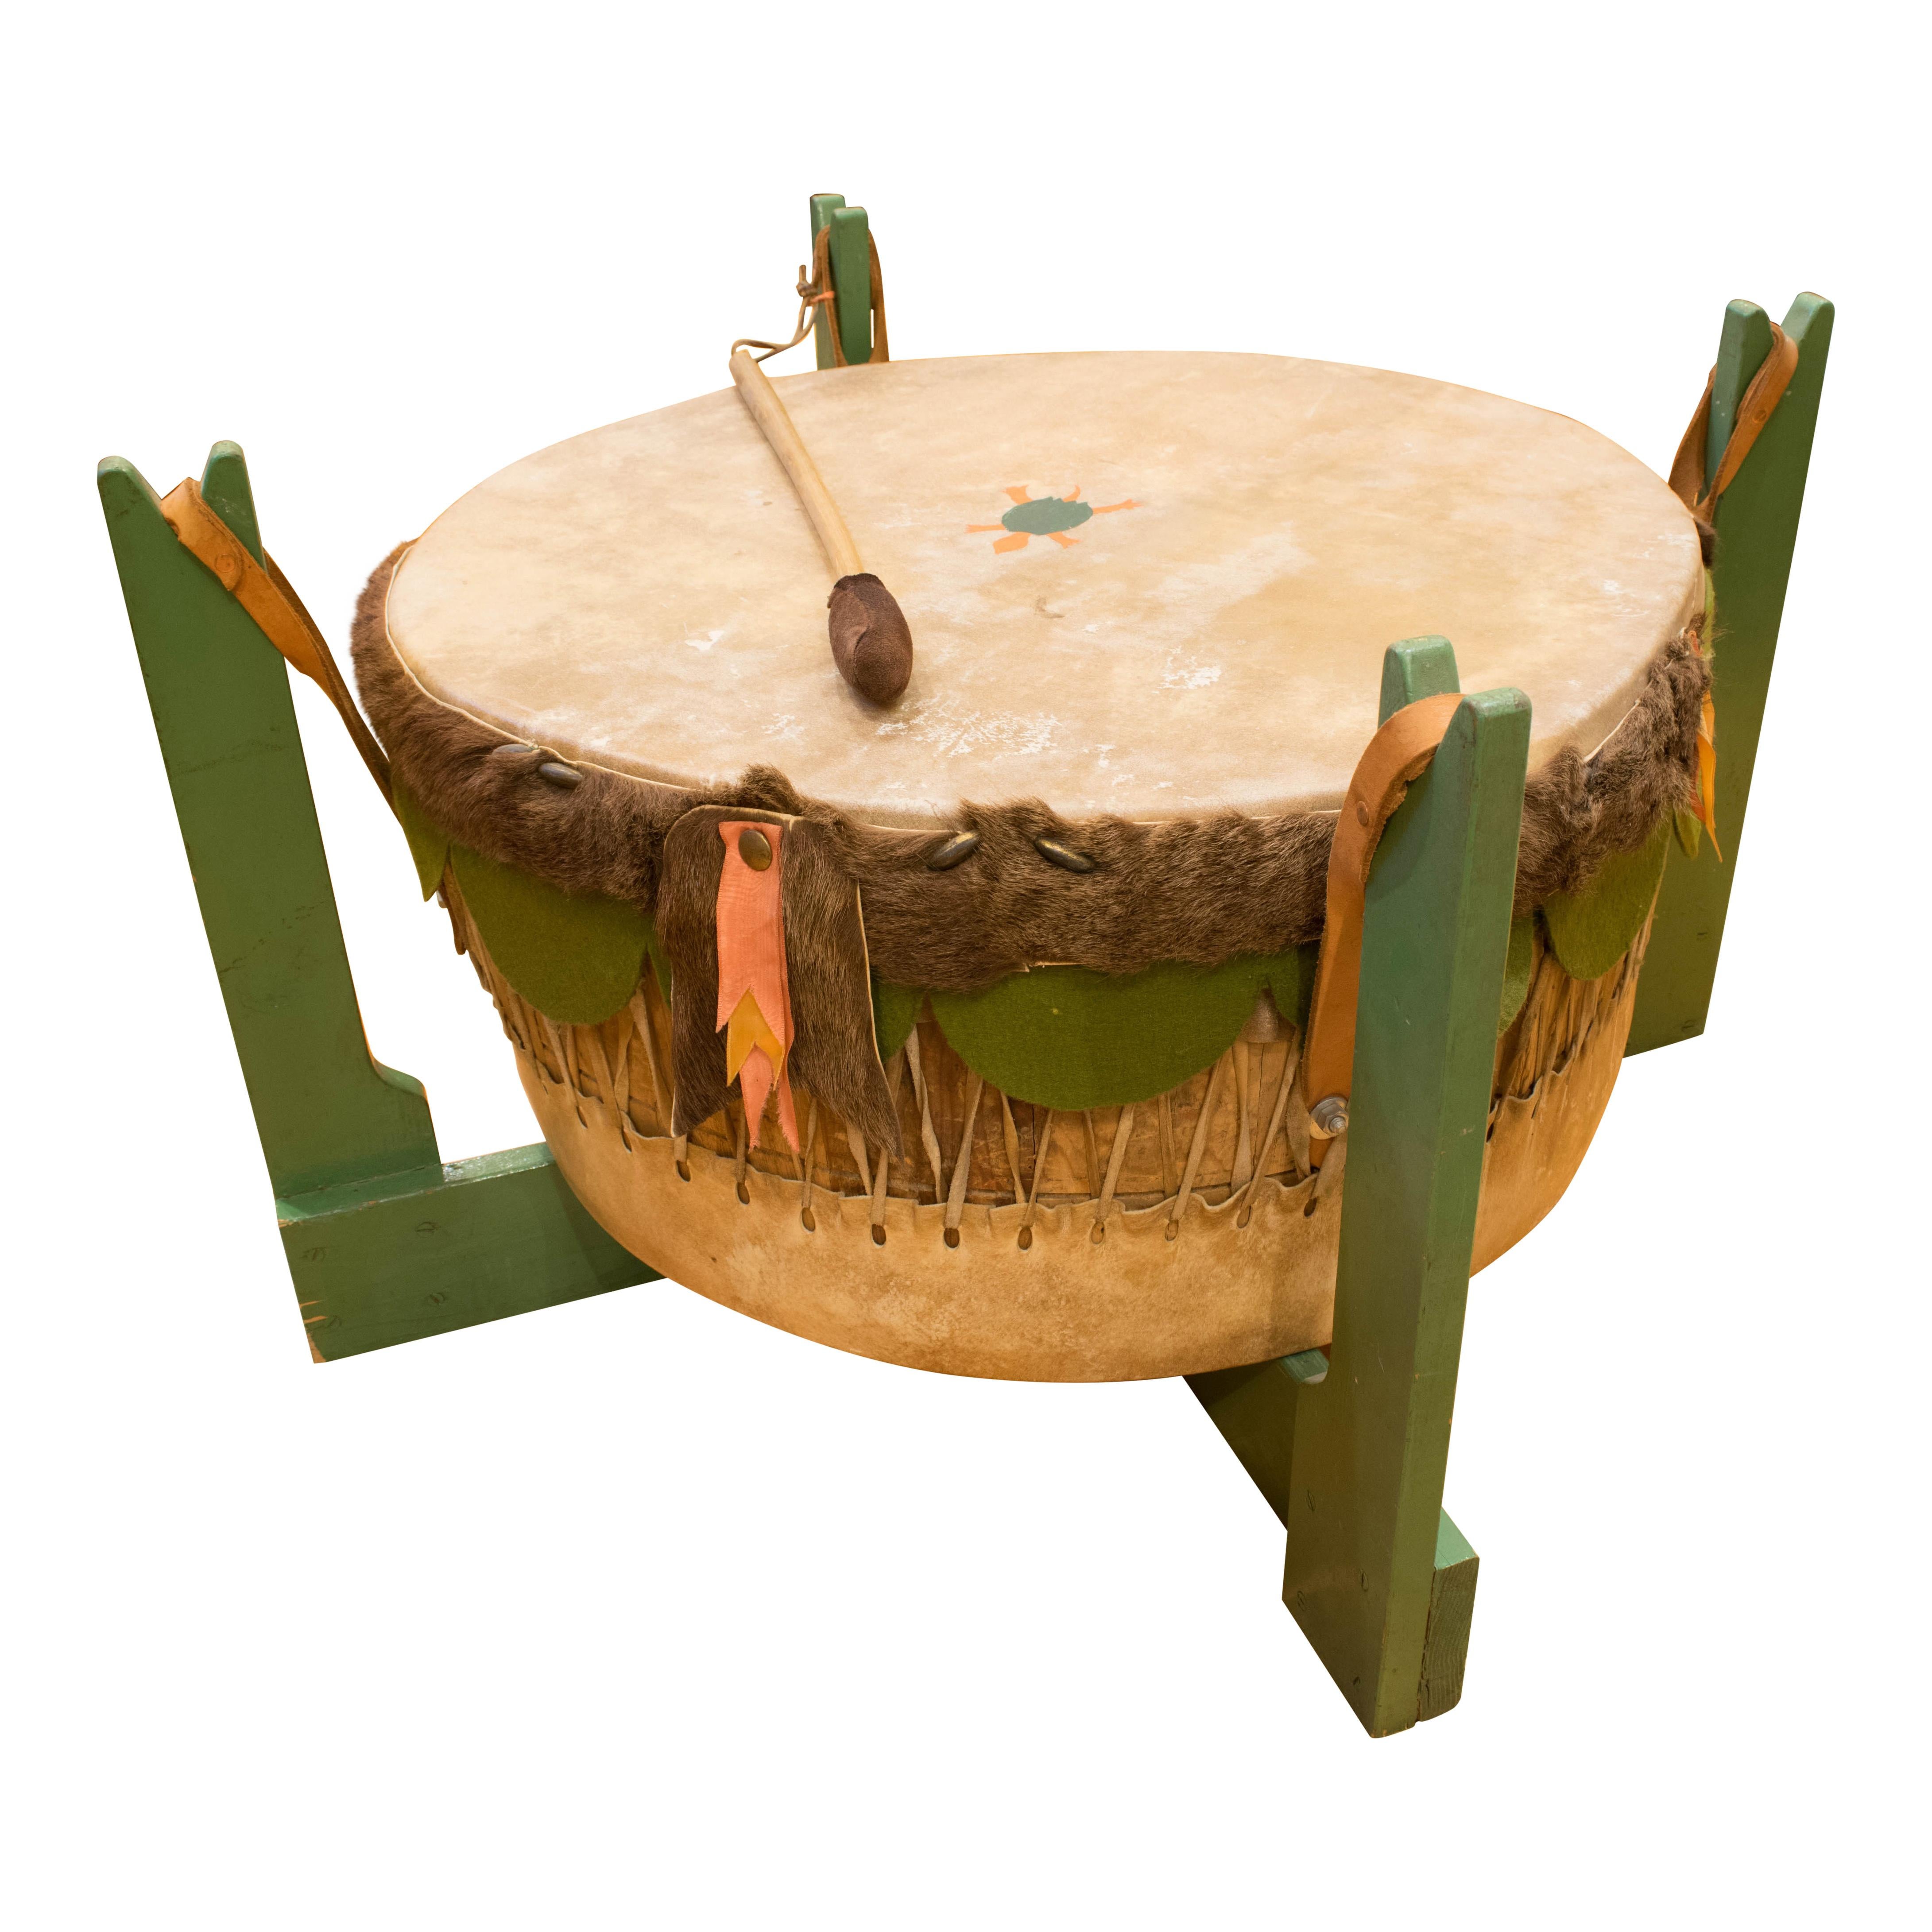 Ojibwe Pow Wow drum from Wisconsin. Originally mounted above ground with sticks pounded into the ground, having 